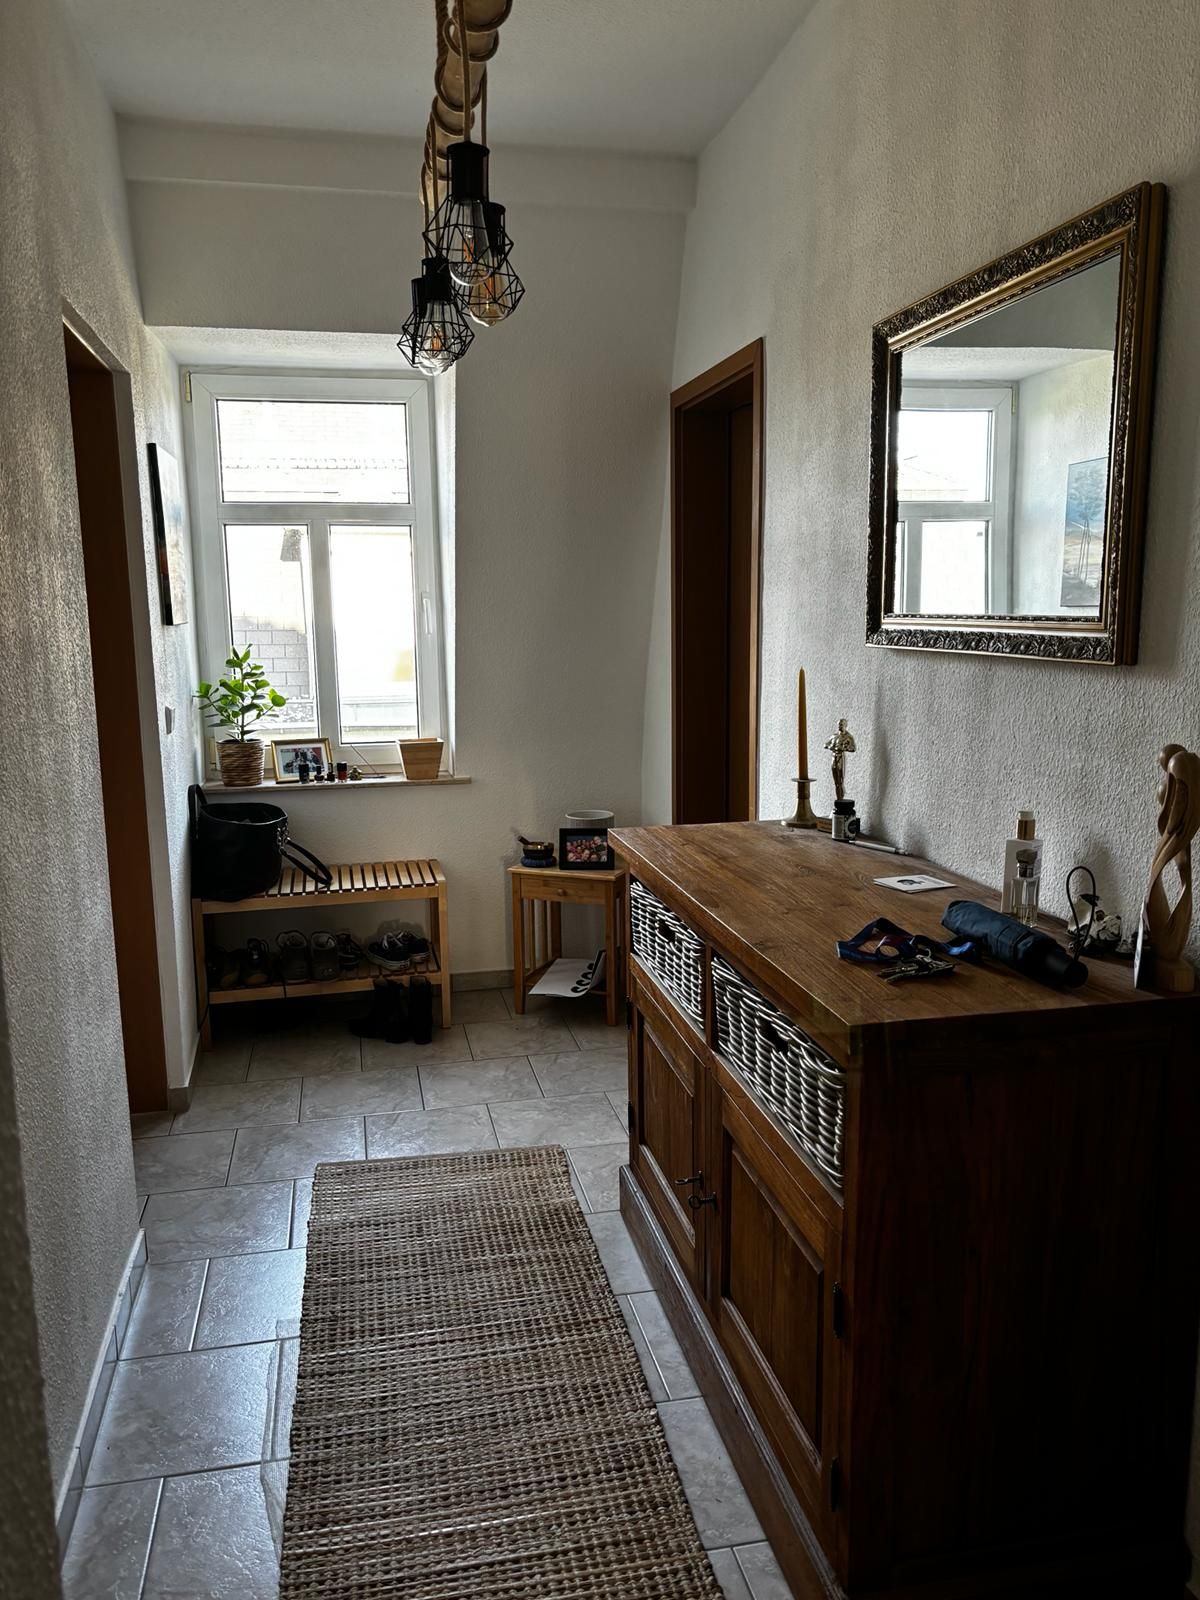 Lovingly furnished, cosy retreat on the Elbe